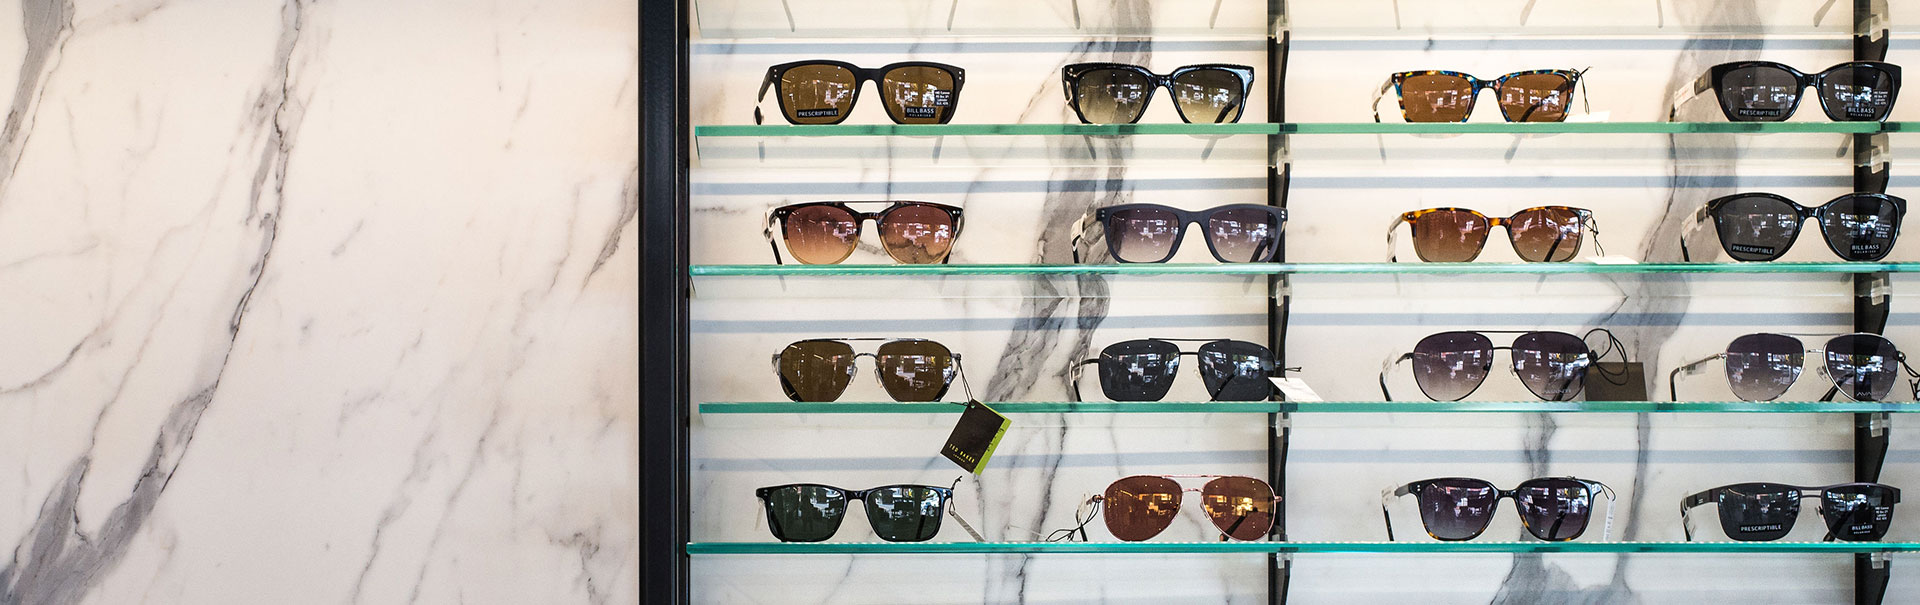 Glass shelves with sunglasses on display